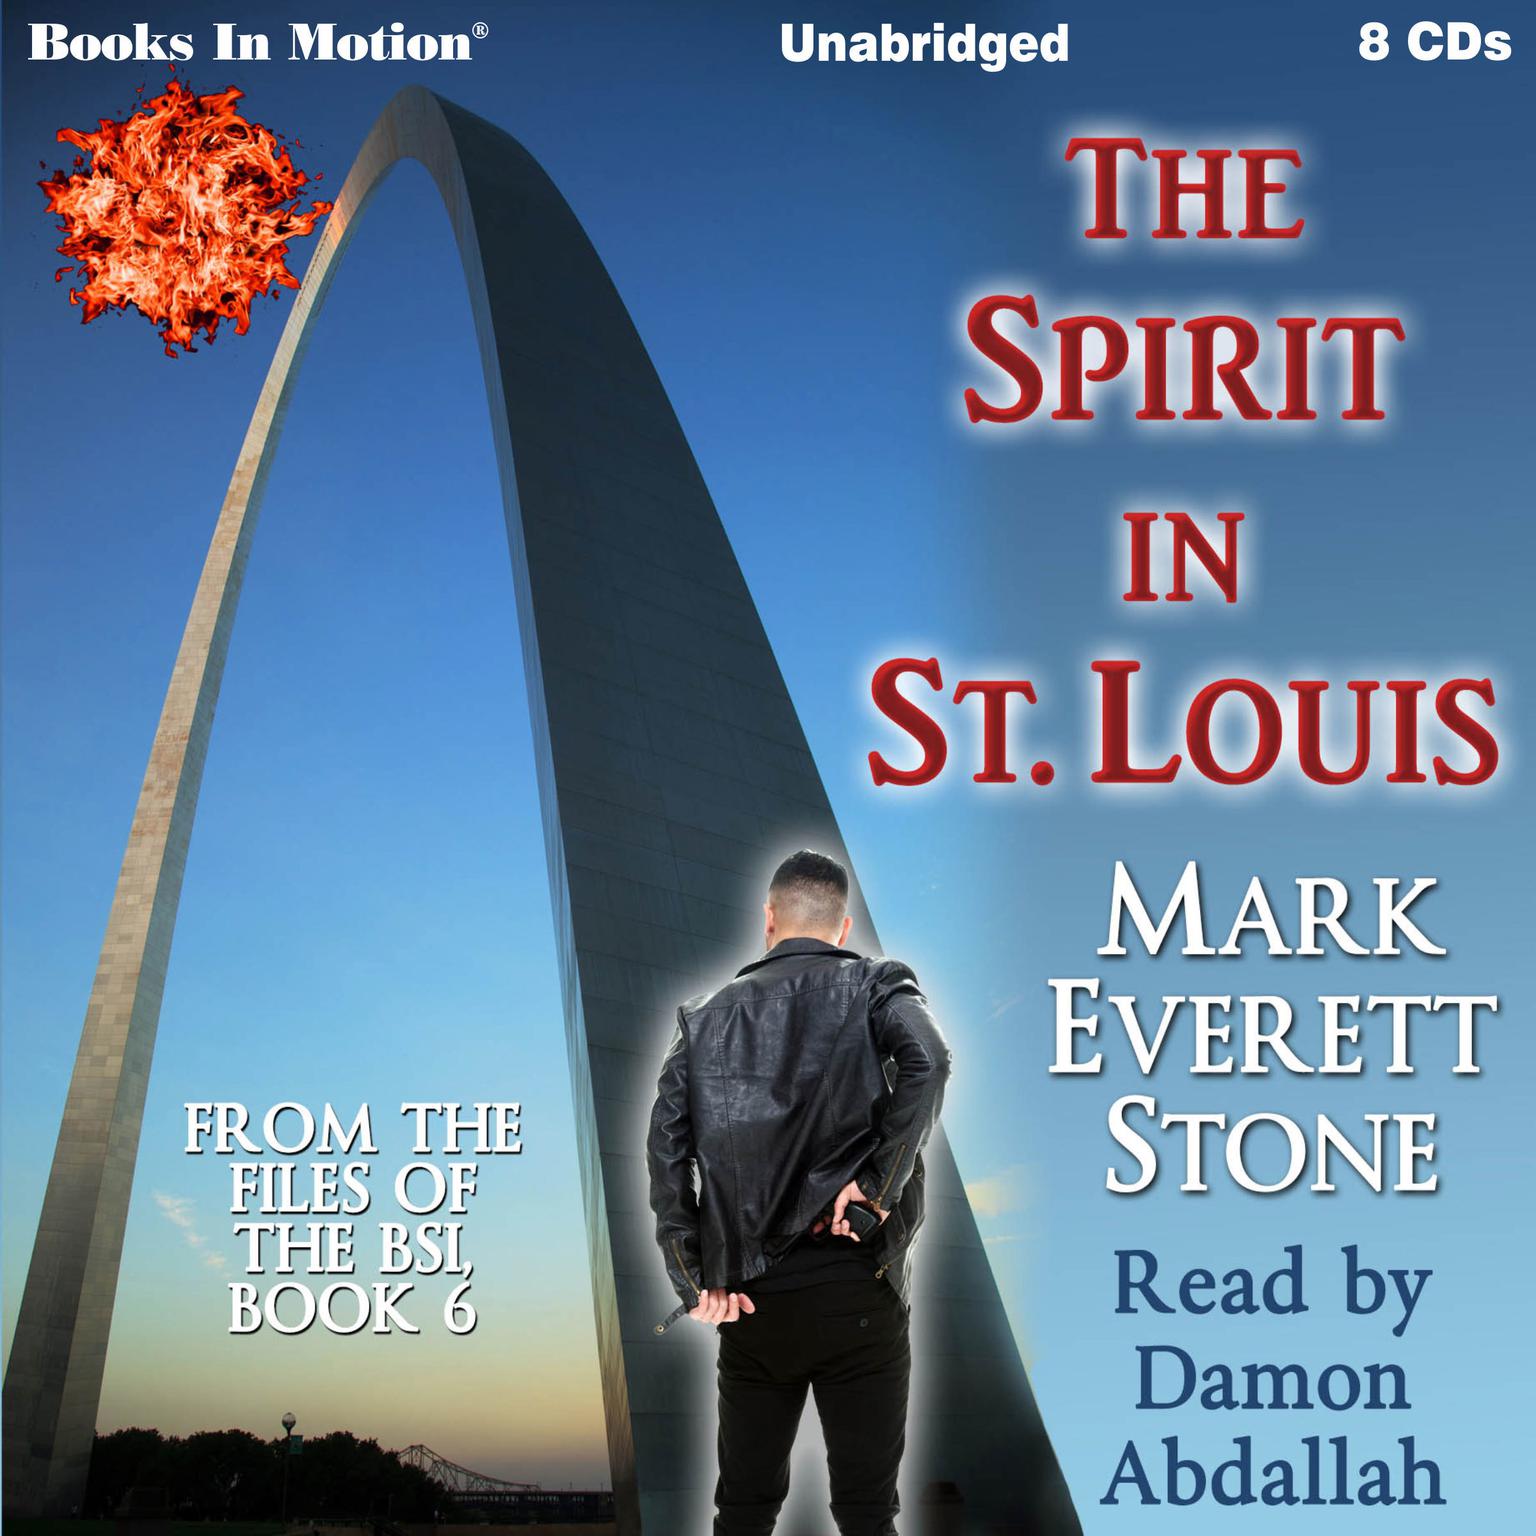 The Spirit In St. Louis (From the Files of the FBI, Book 6): From the Files of the FBI, Book 6 Audiobook, by Mark Everett Stone